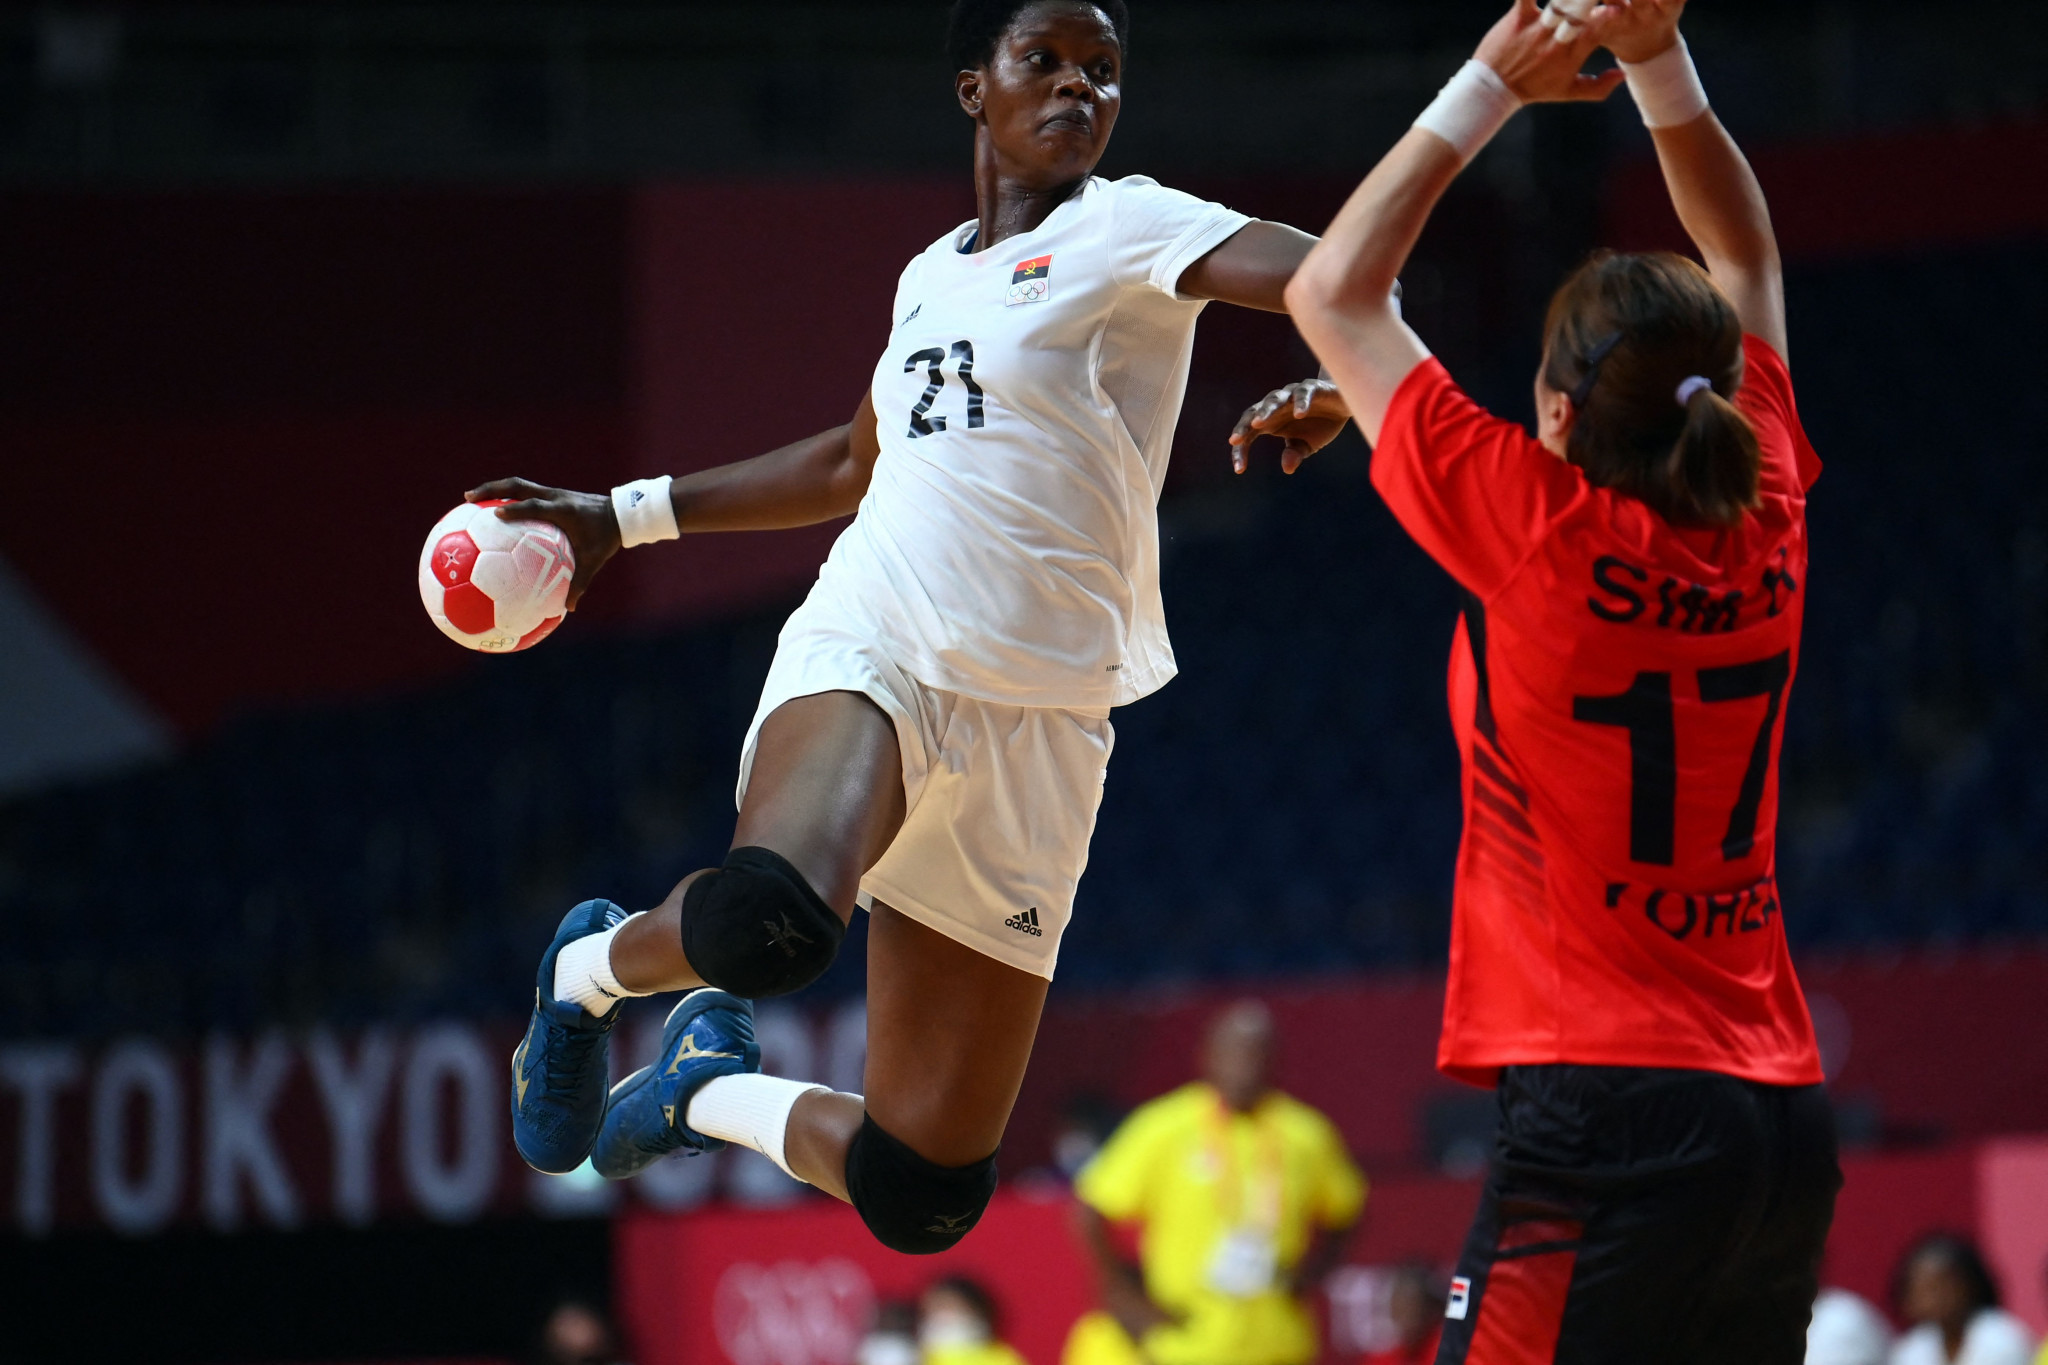 Handball was one of four sports that Angola competed in at the Tokyo 2020 Olympics ©Getty Images